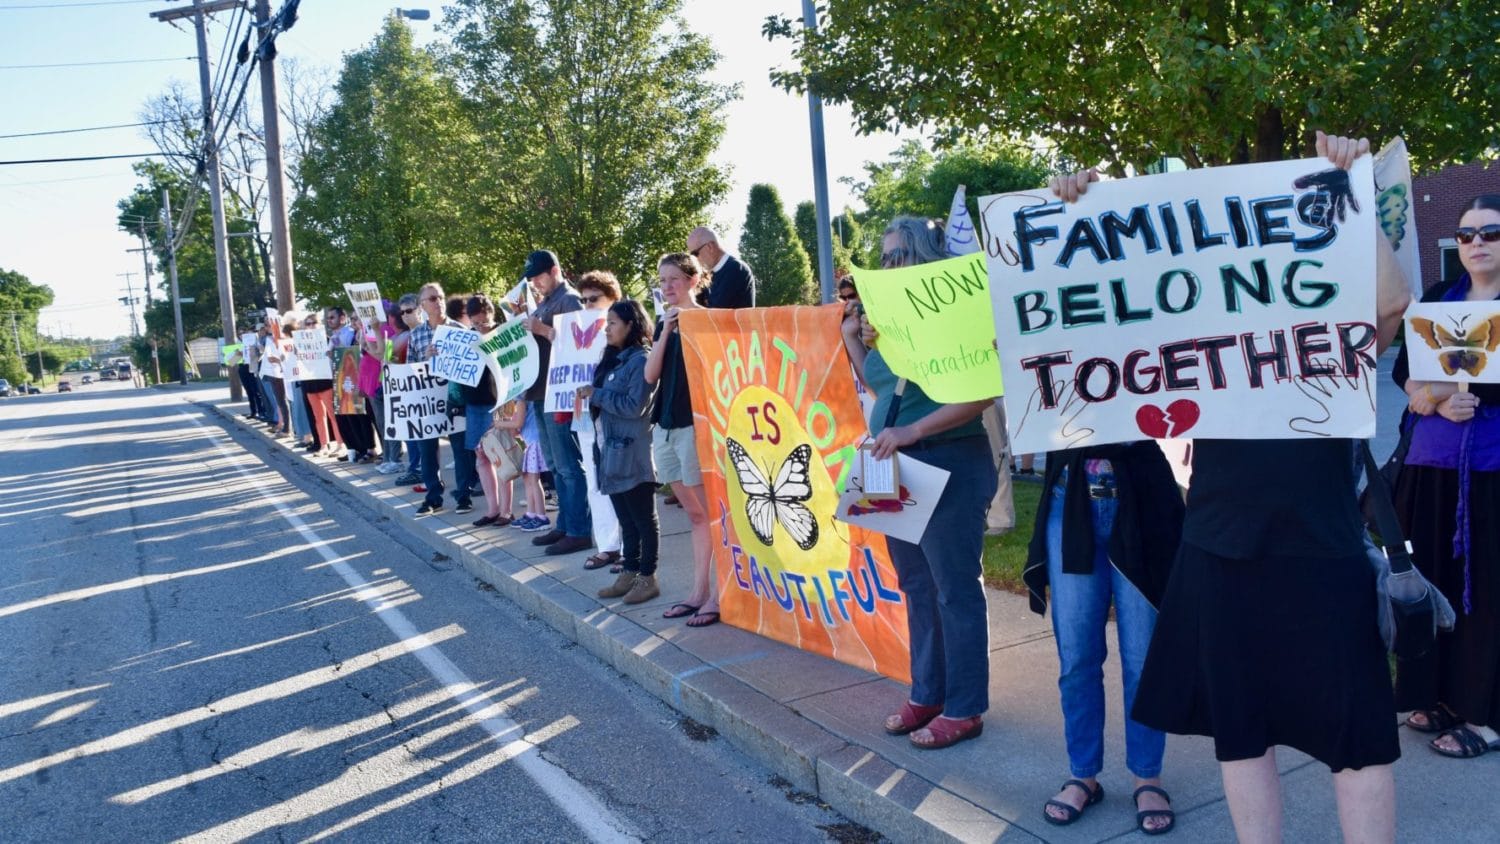 Silent vigil held in opposition to family separation policy at the border